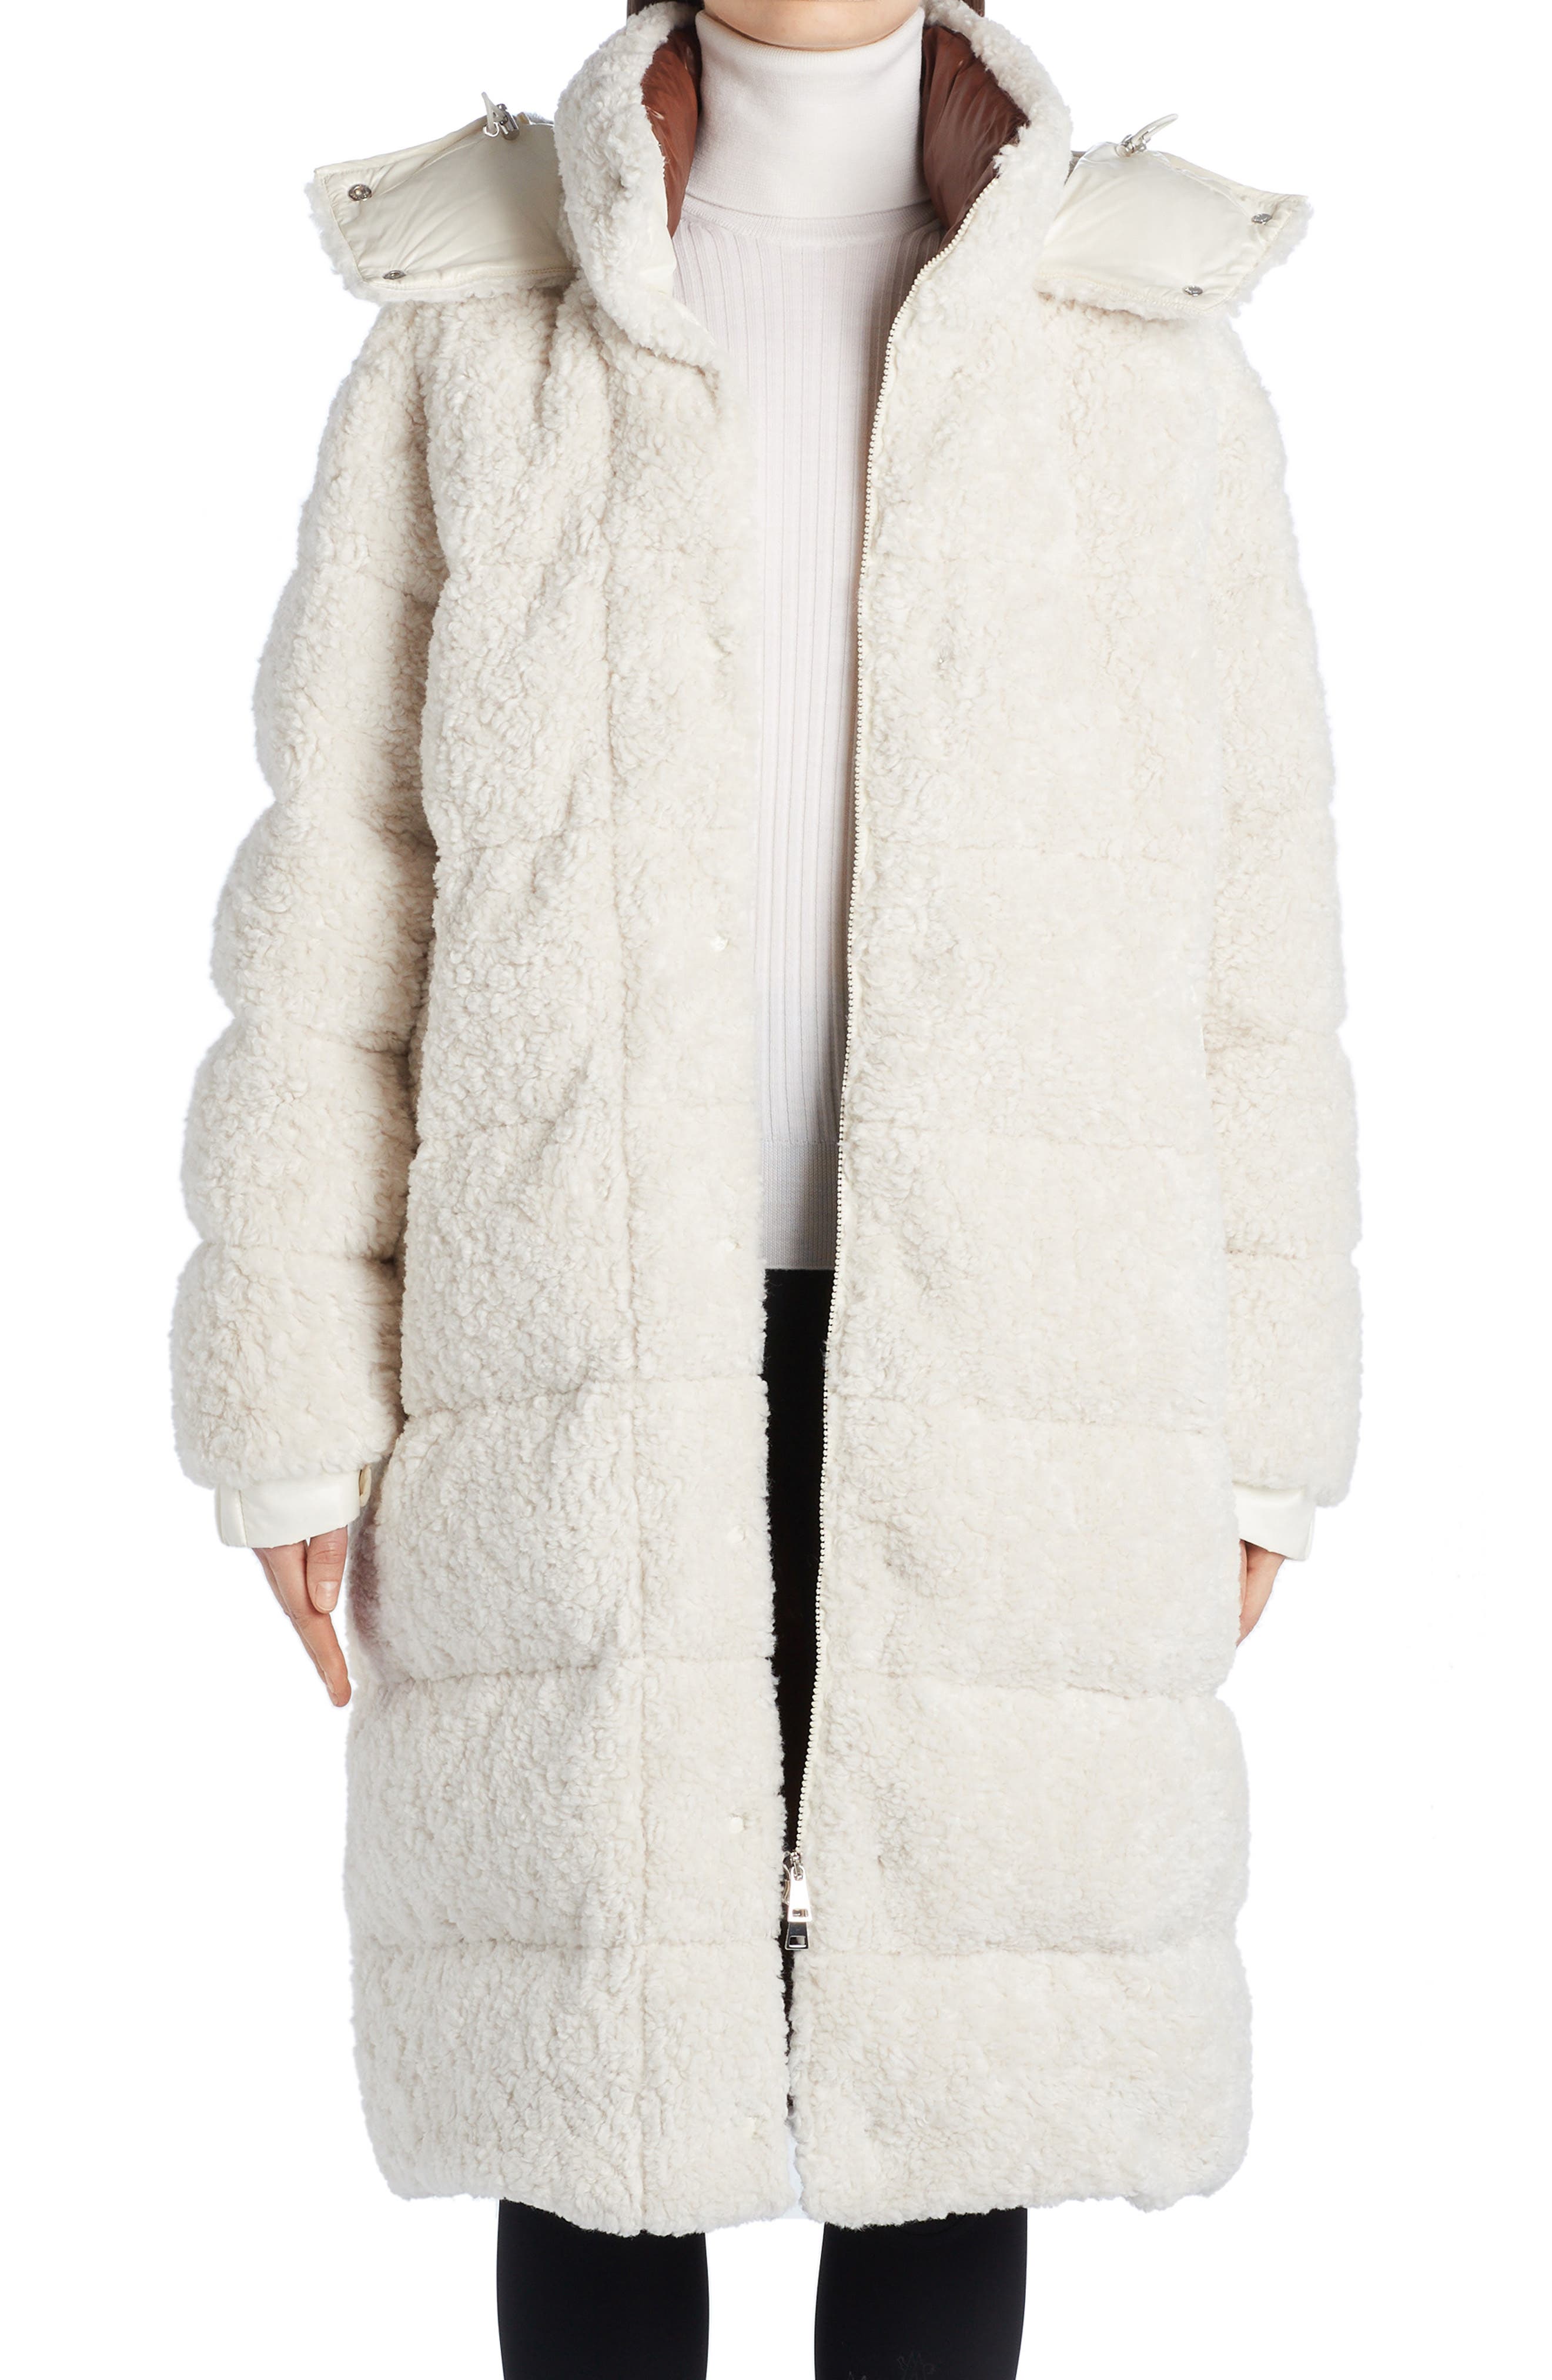 Moncler Hainardia 750 Fill-Power Down Teddy Fleece Parka in Natural at Nordstrom, Size 1